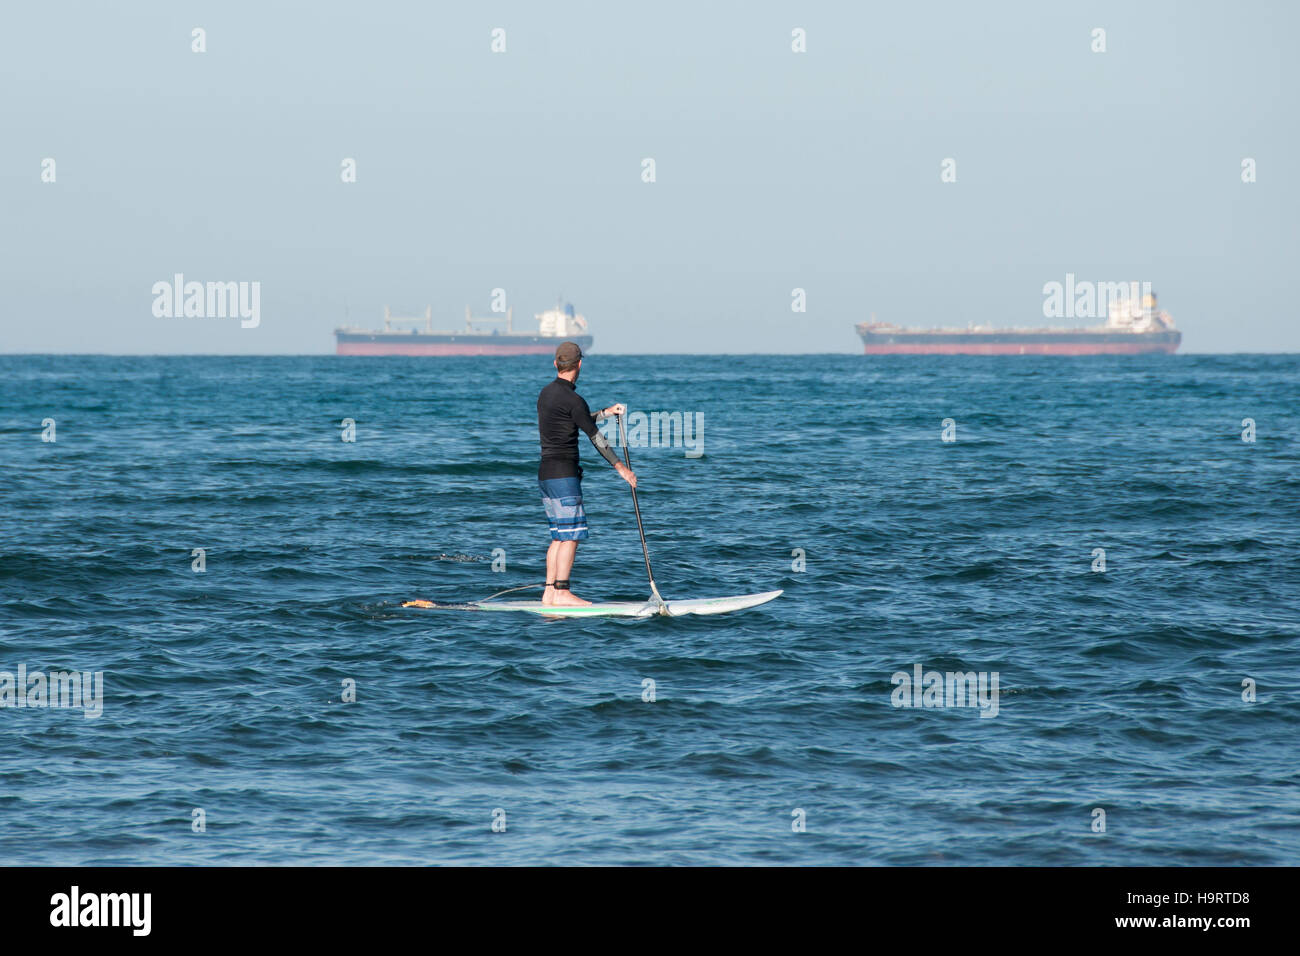 Stand Up Paddle Surfer Stock Photo